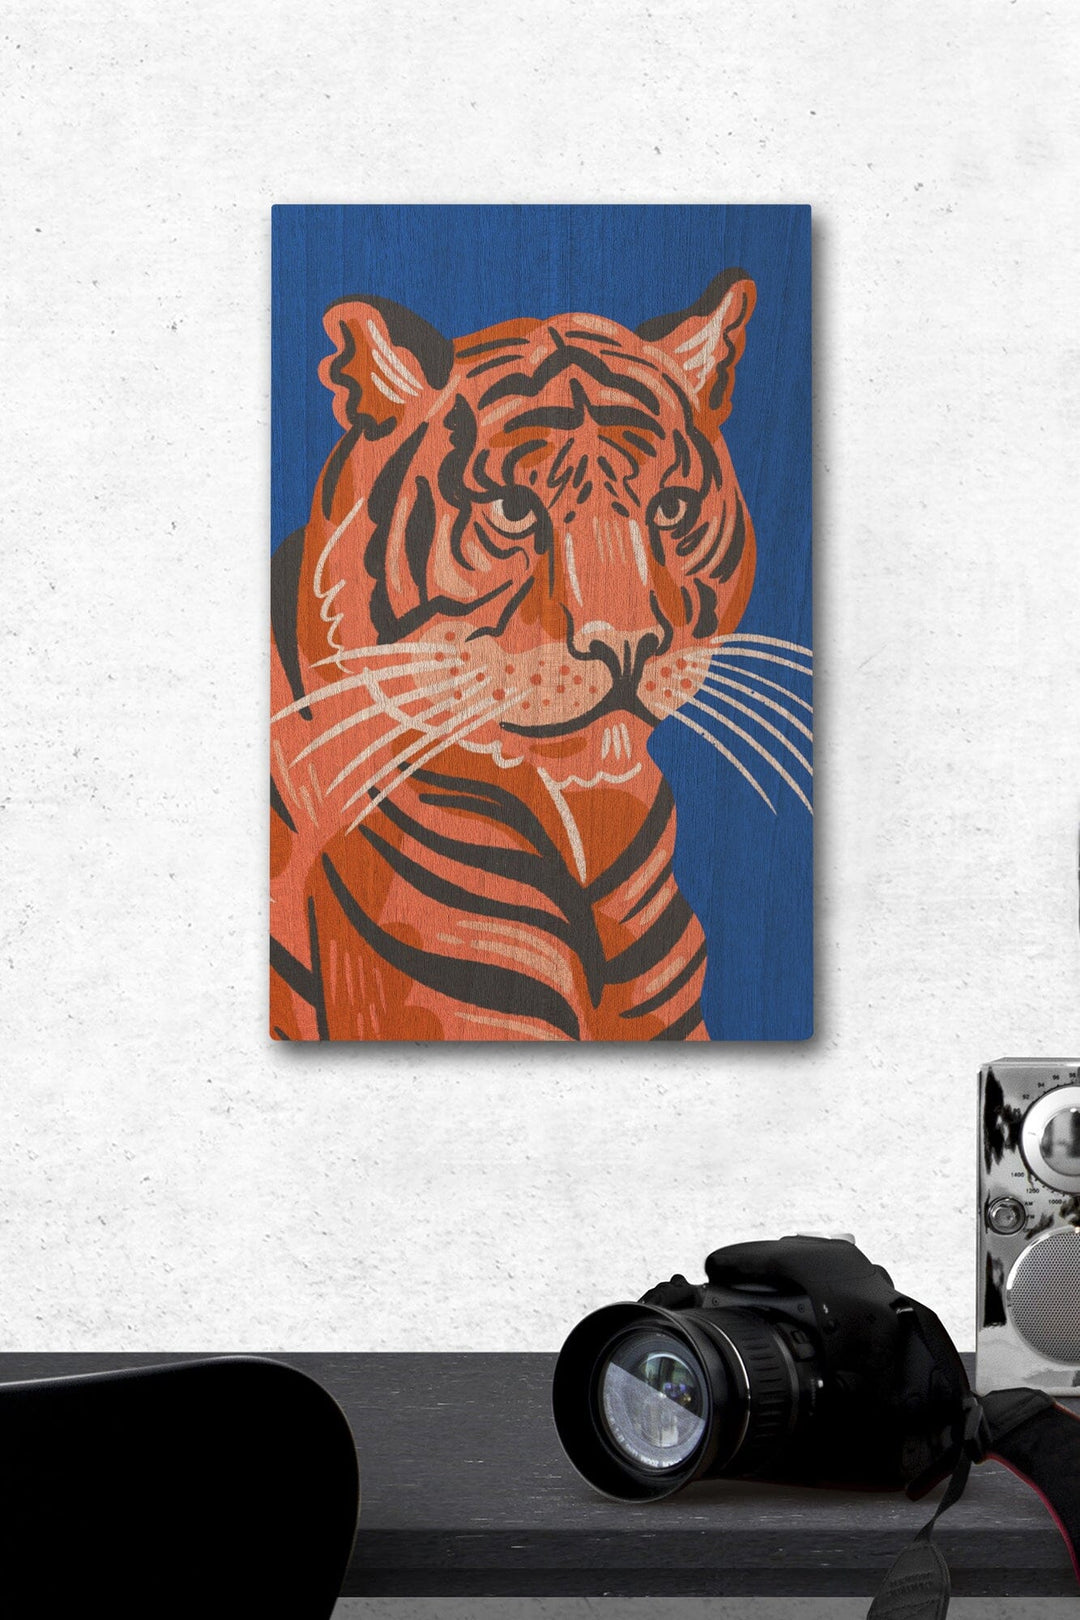 Lush Environment Collection, Tiger Portrait, Wood Signs and Postcards Wood Lantern Press 12 x 18 Wood Gallery Print 